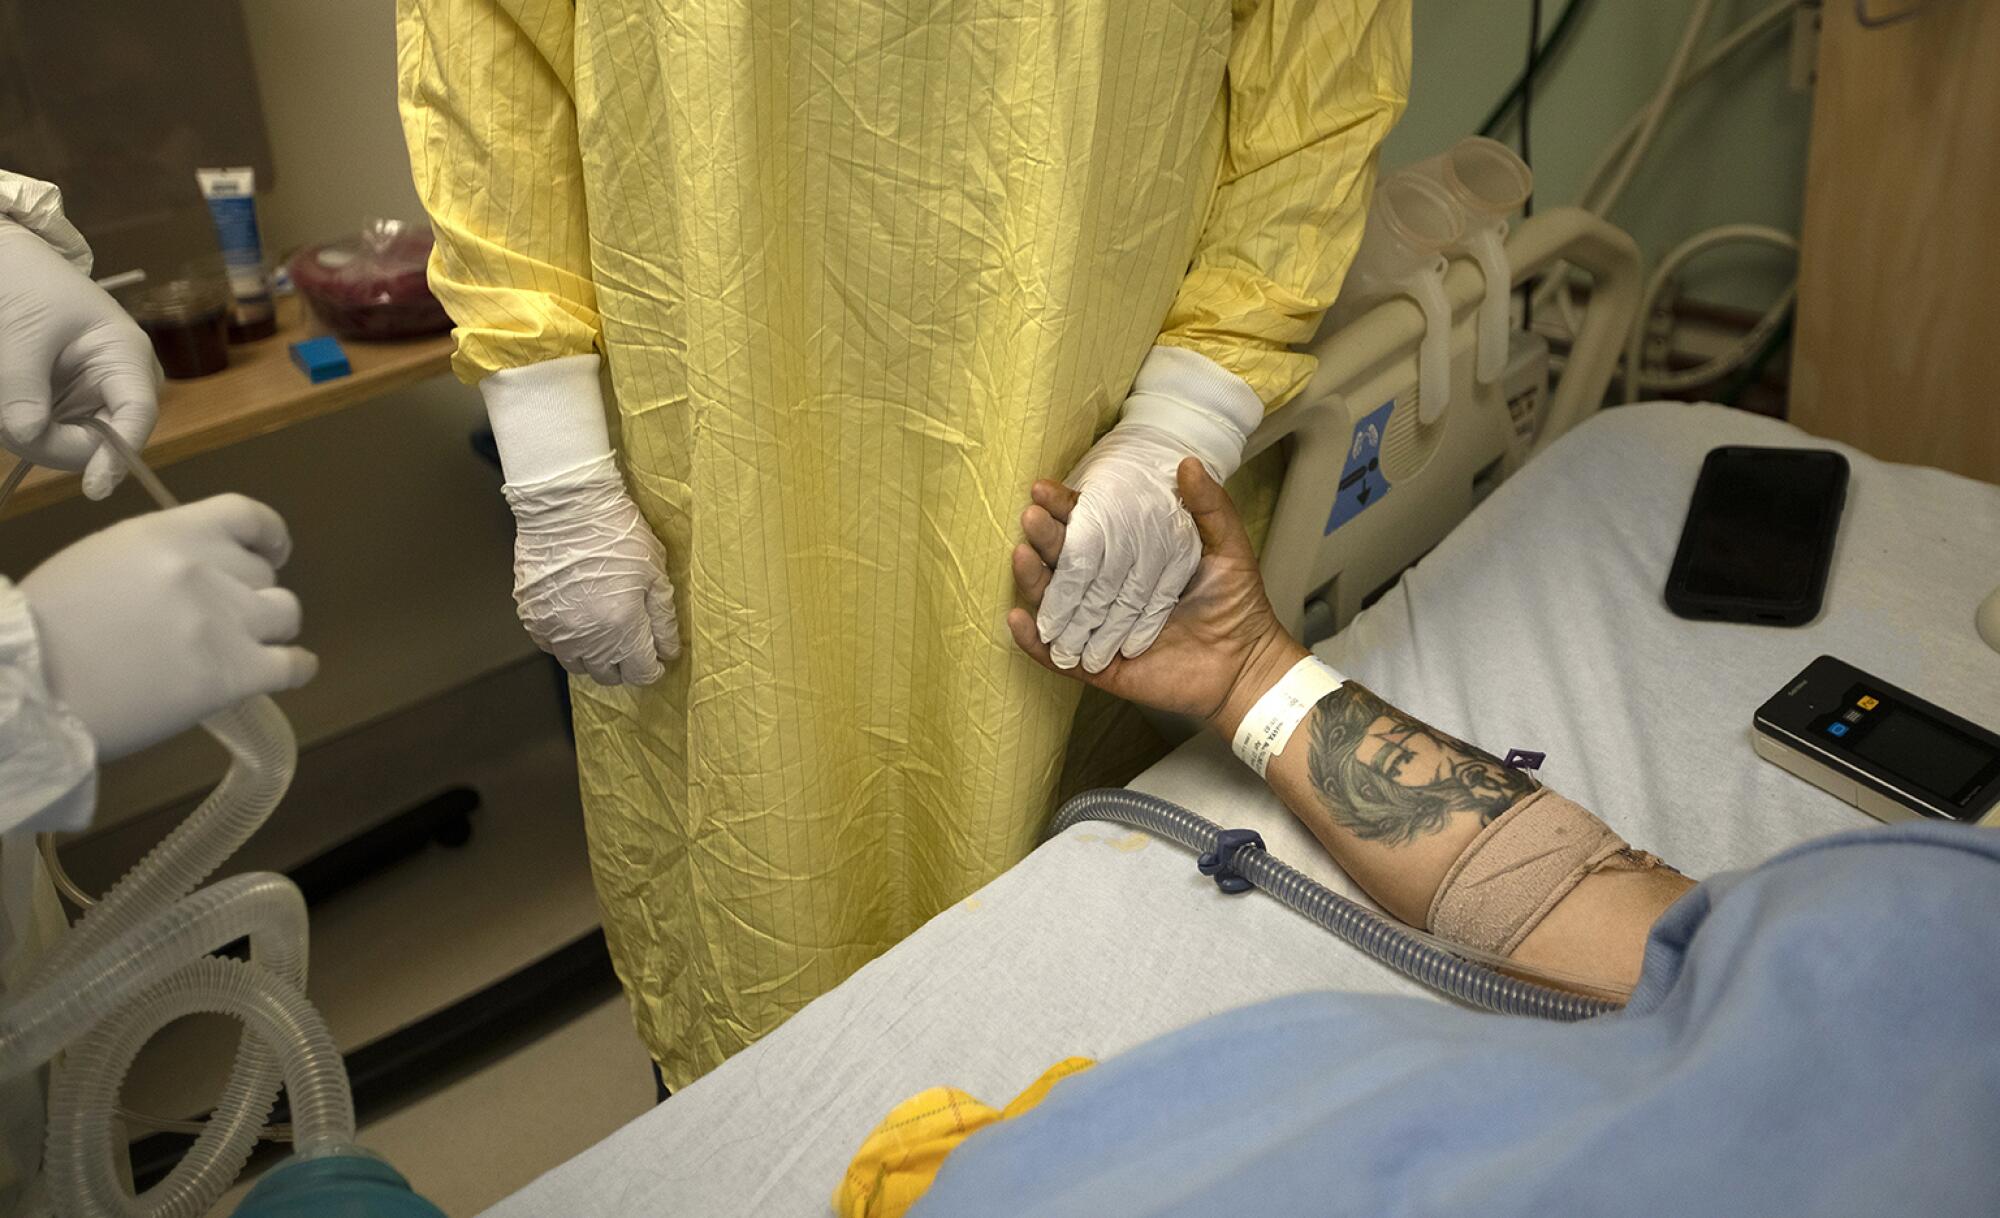 Nurse Jess Esperti holds Mariano Zuñiga Anaya's hand to relieve his anxiety about intubation.